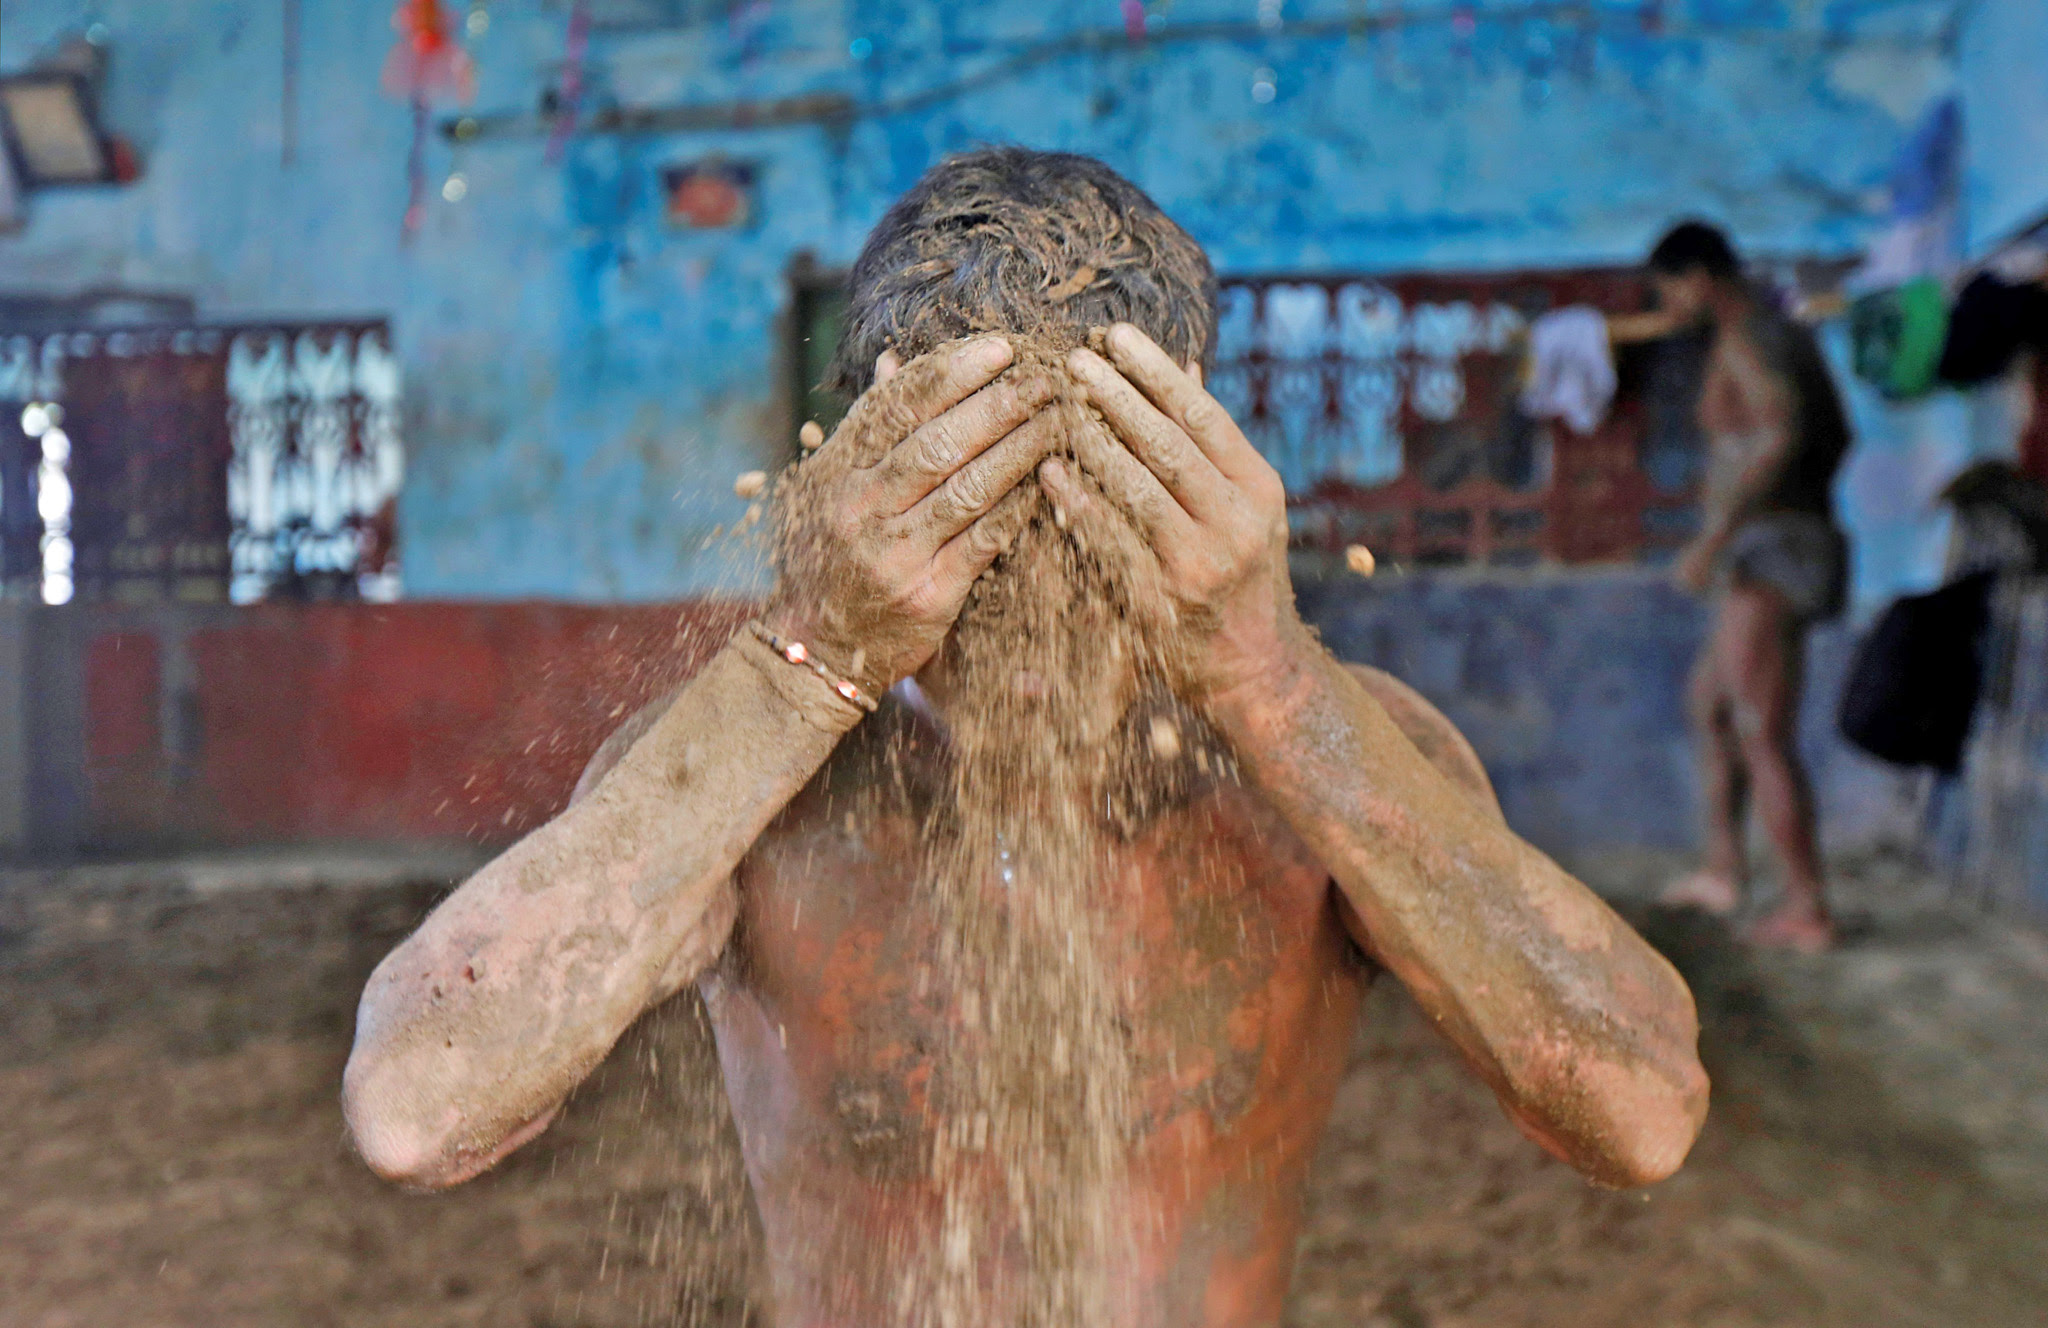 A wrestler applies mud to prevent slipping due to sweat, at a traditional training centre on the banks of the river Ganges ahead of the Bengal mud wrestling championships, in Kolkata, India today